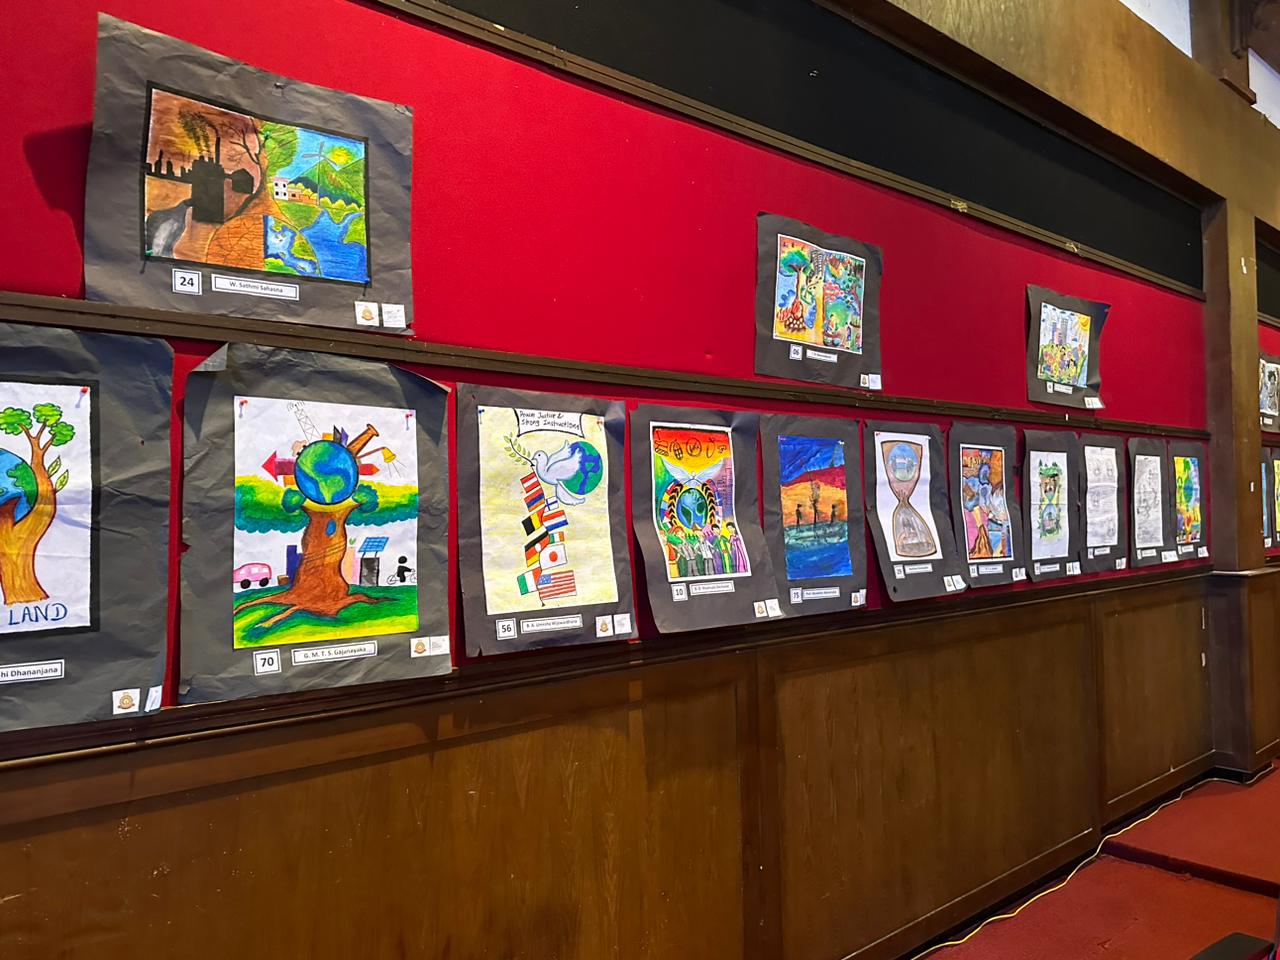 Students from the University in Colombo in Sri Lanka made art related to disaster risk reduction. An exhibit was part of the Asia-Pacific Alliance for Disaster Management Sri Lanka celebration of the International Day for Disaster Risk Reduction. Photo: A-PAD SL